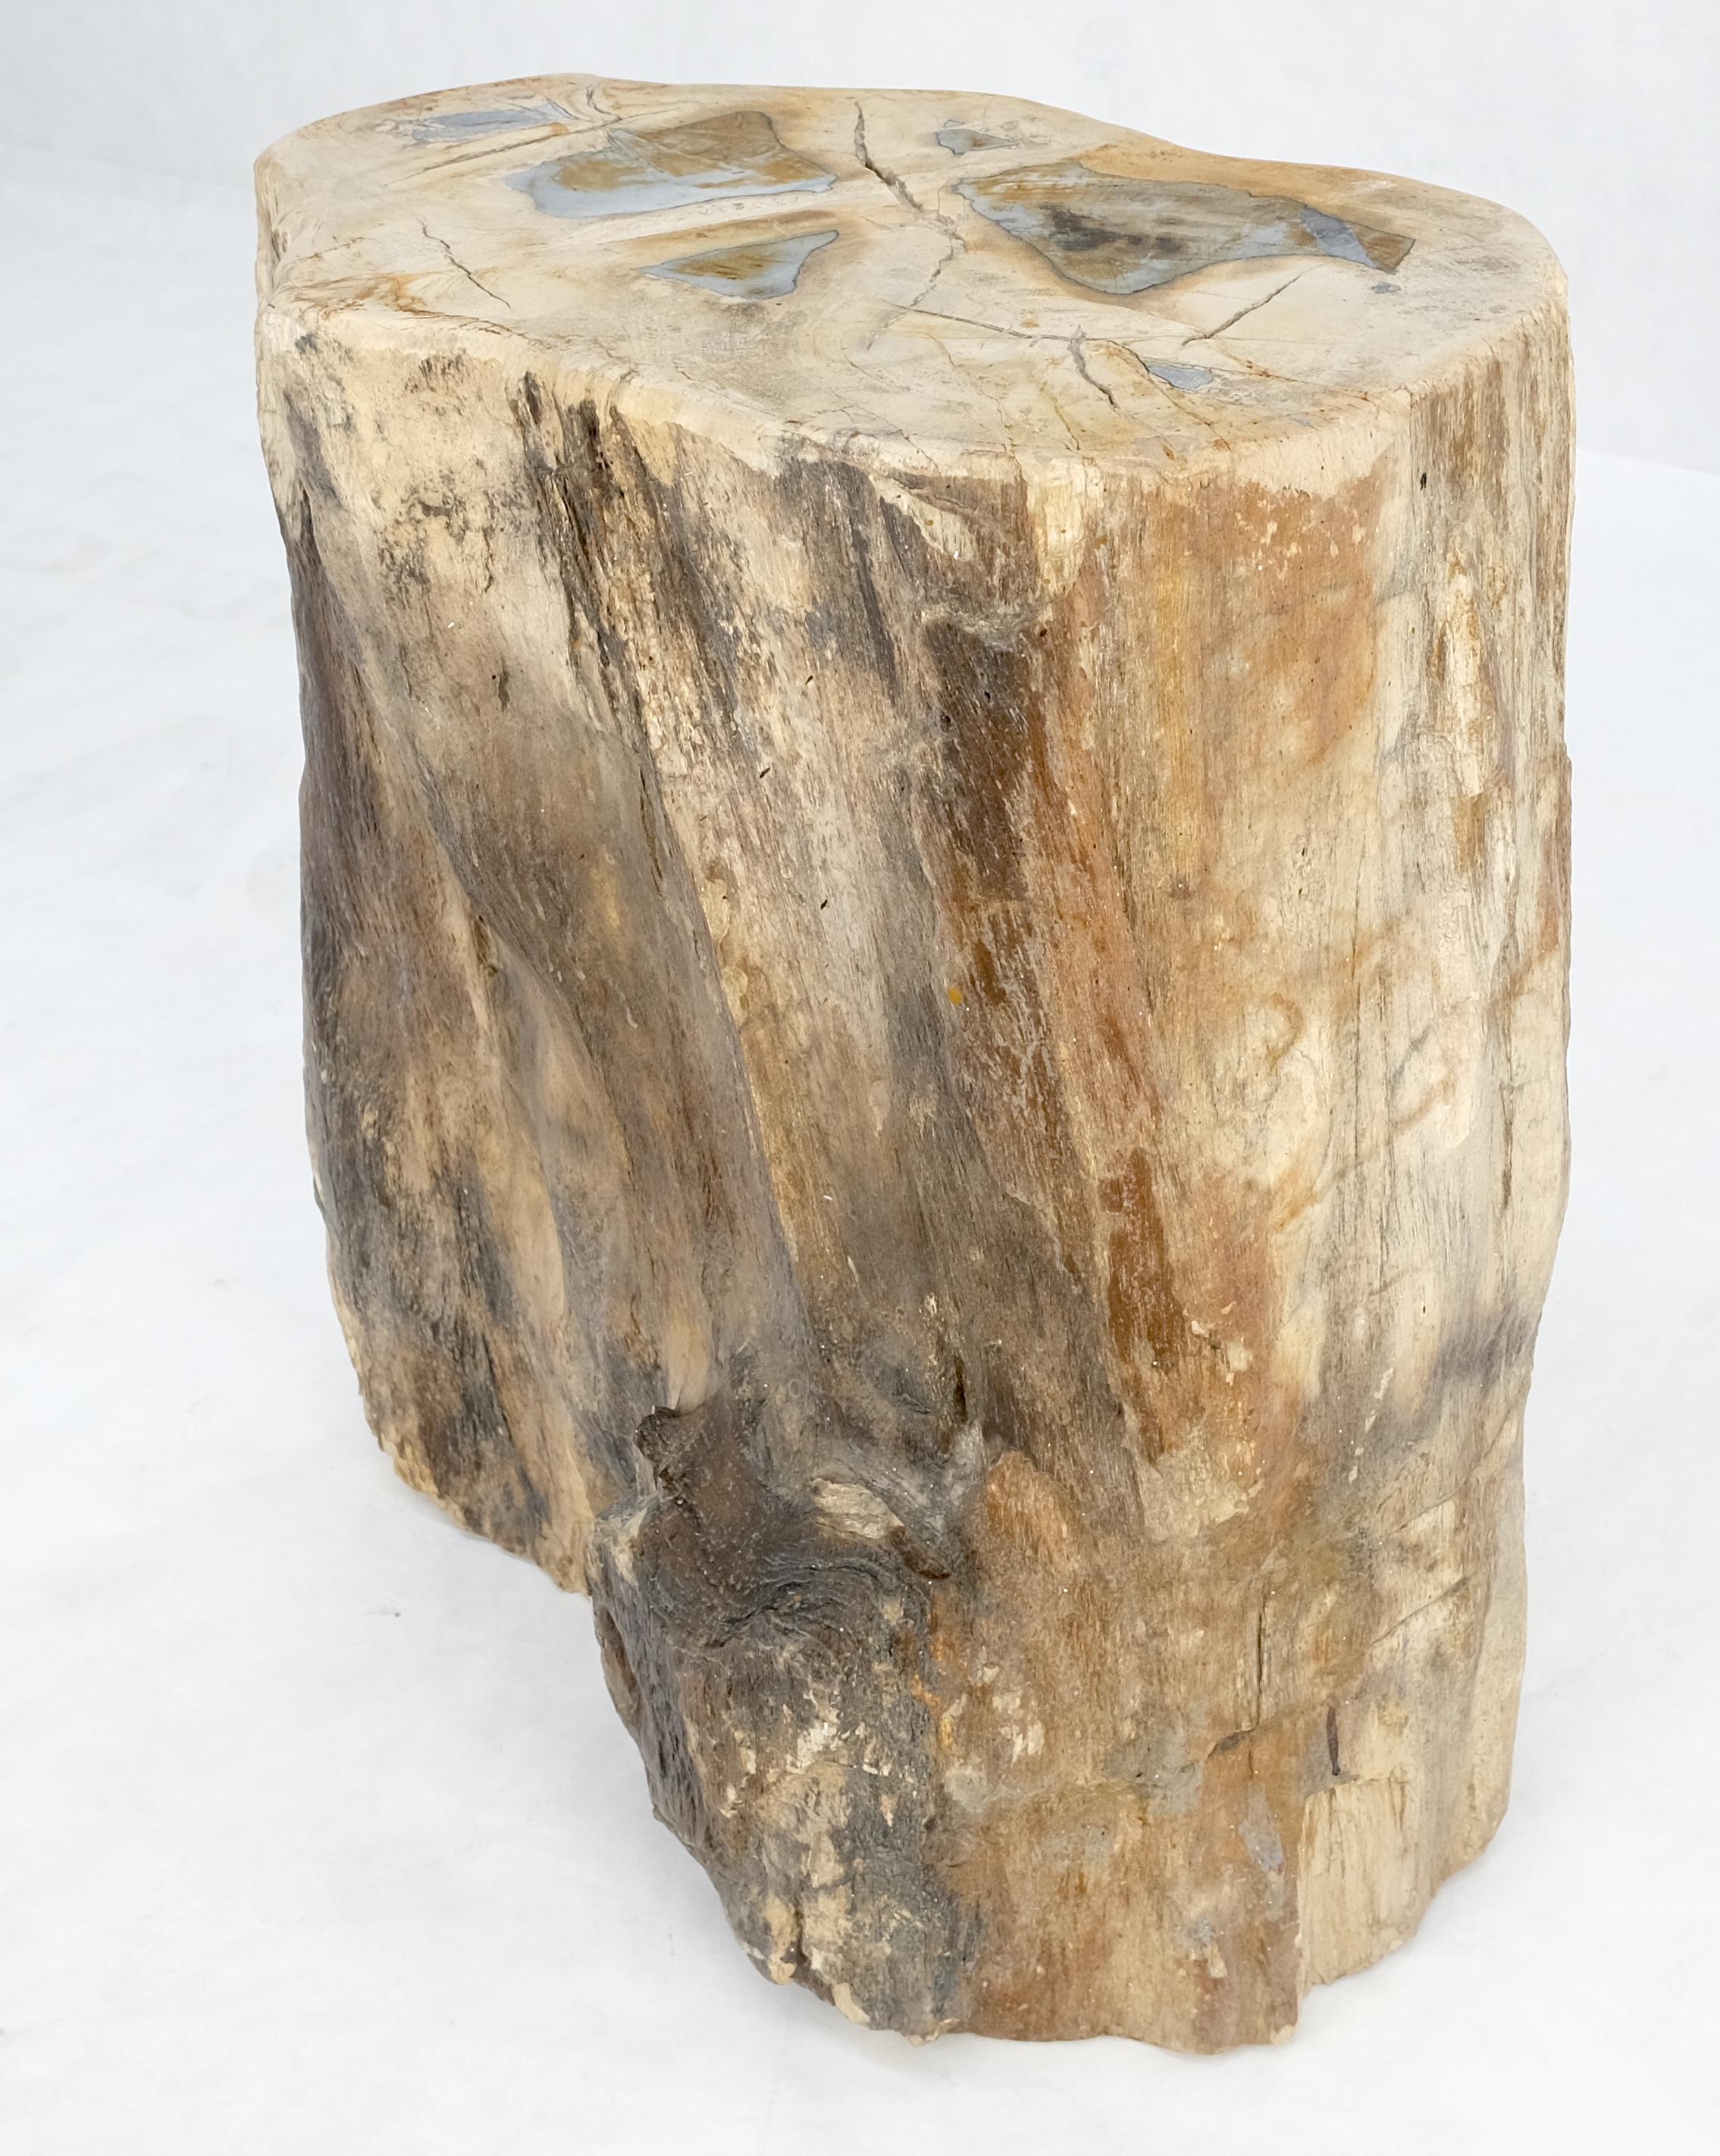 Petrified Wood Organic Shape Multicolor Beige to Black Stand End Table Pedestal In Excellent Condition For Sale In Rockaway, NJ